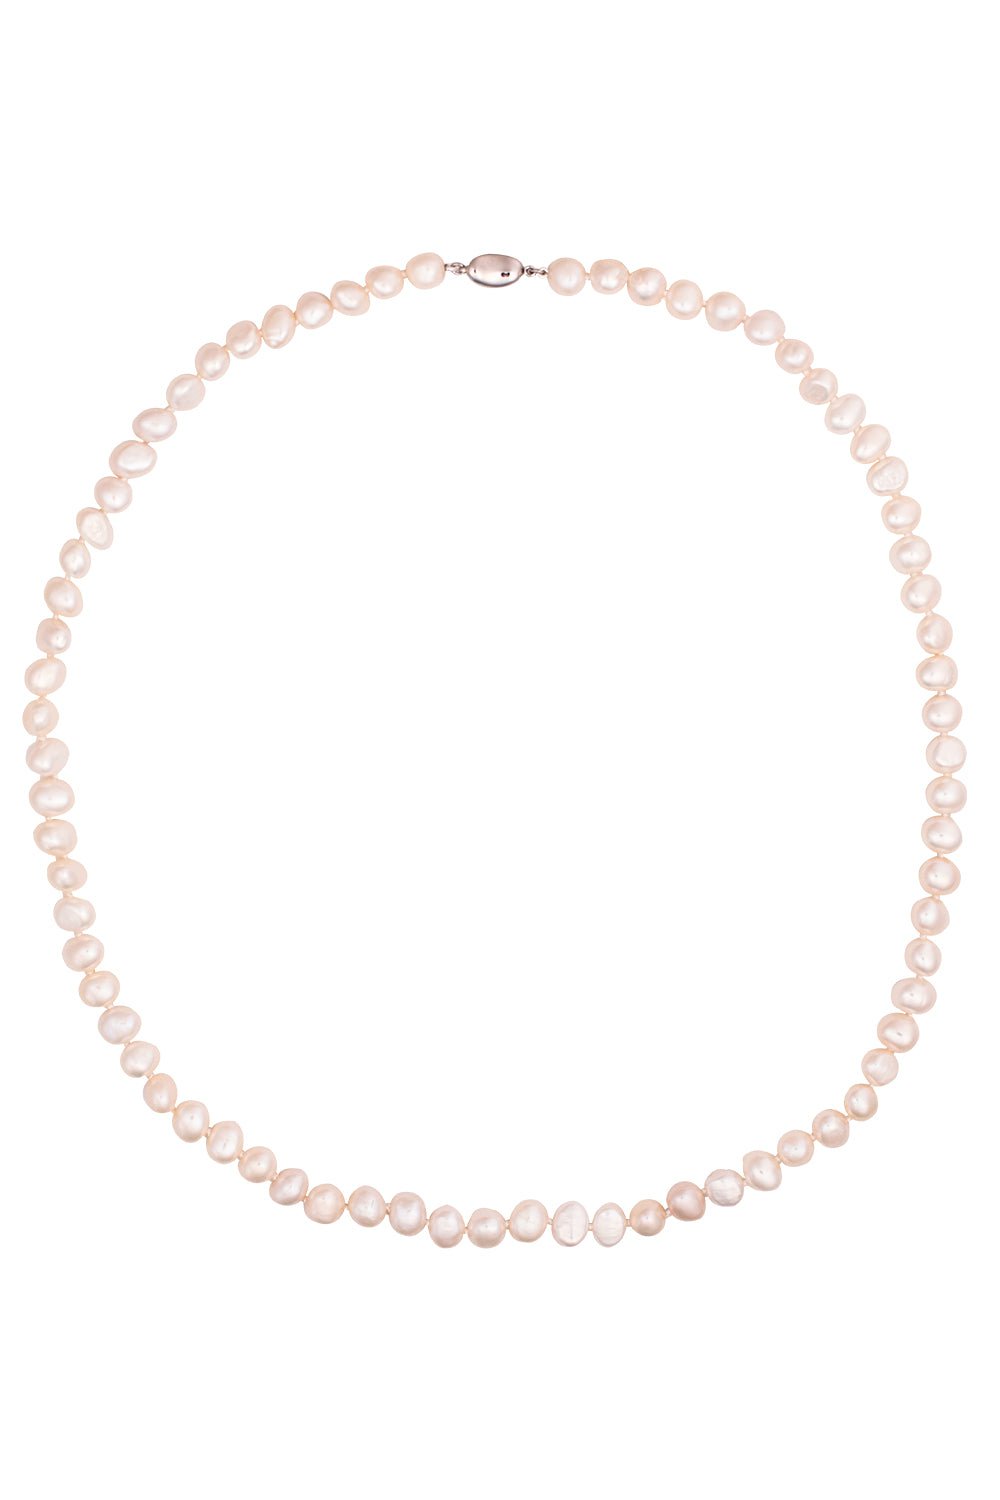 BAGGINS-Freshwater Pearl Necklace-SILVER